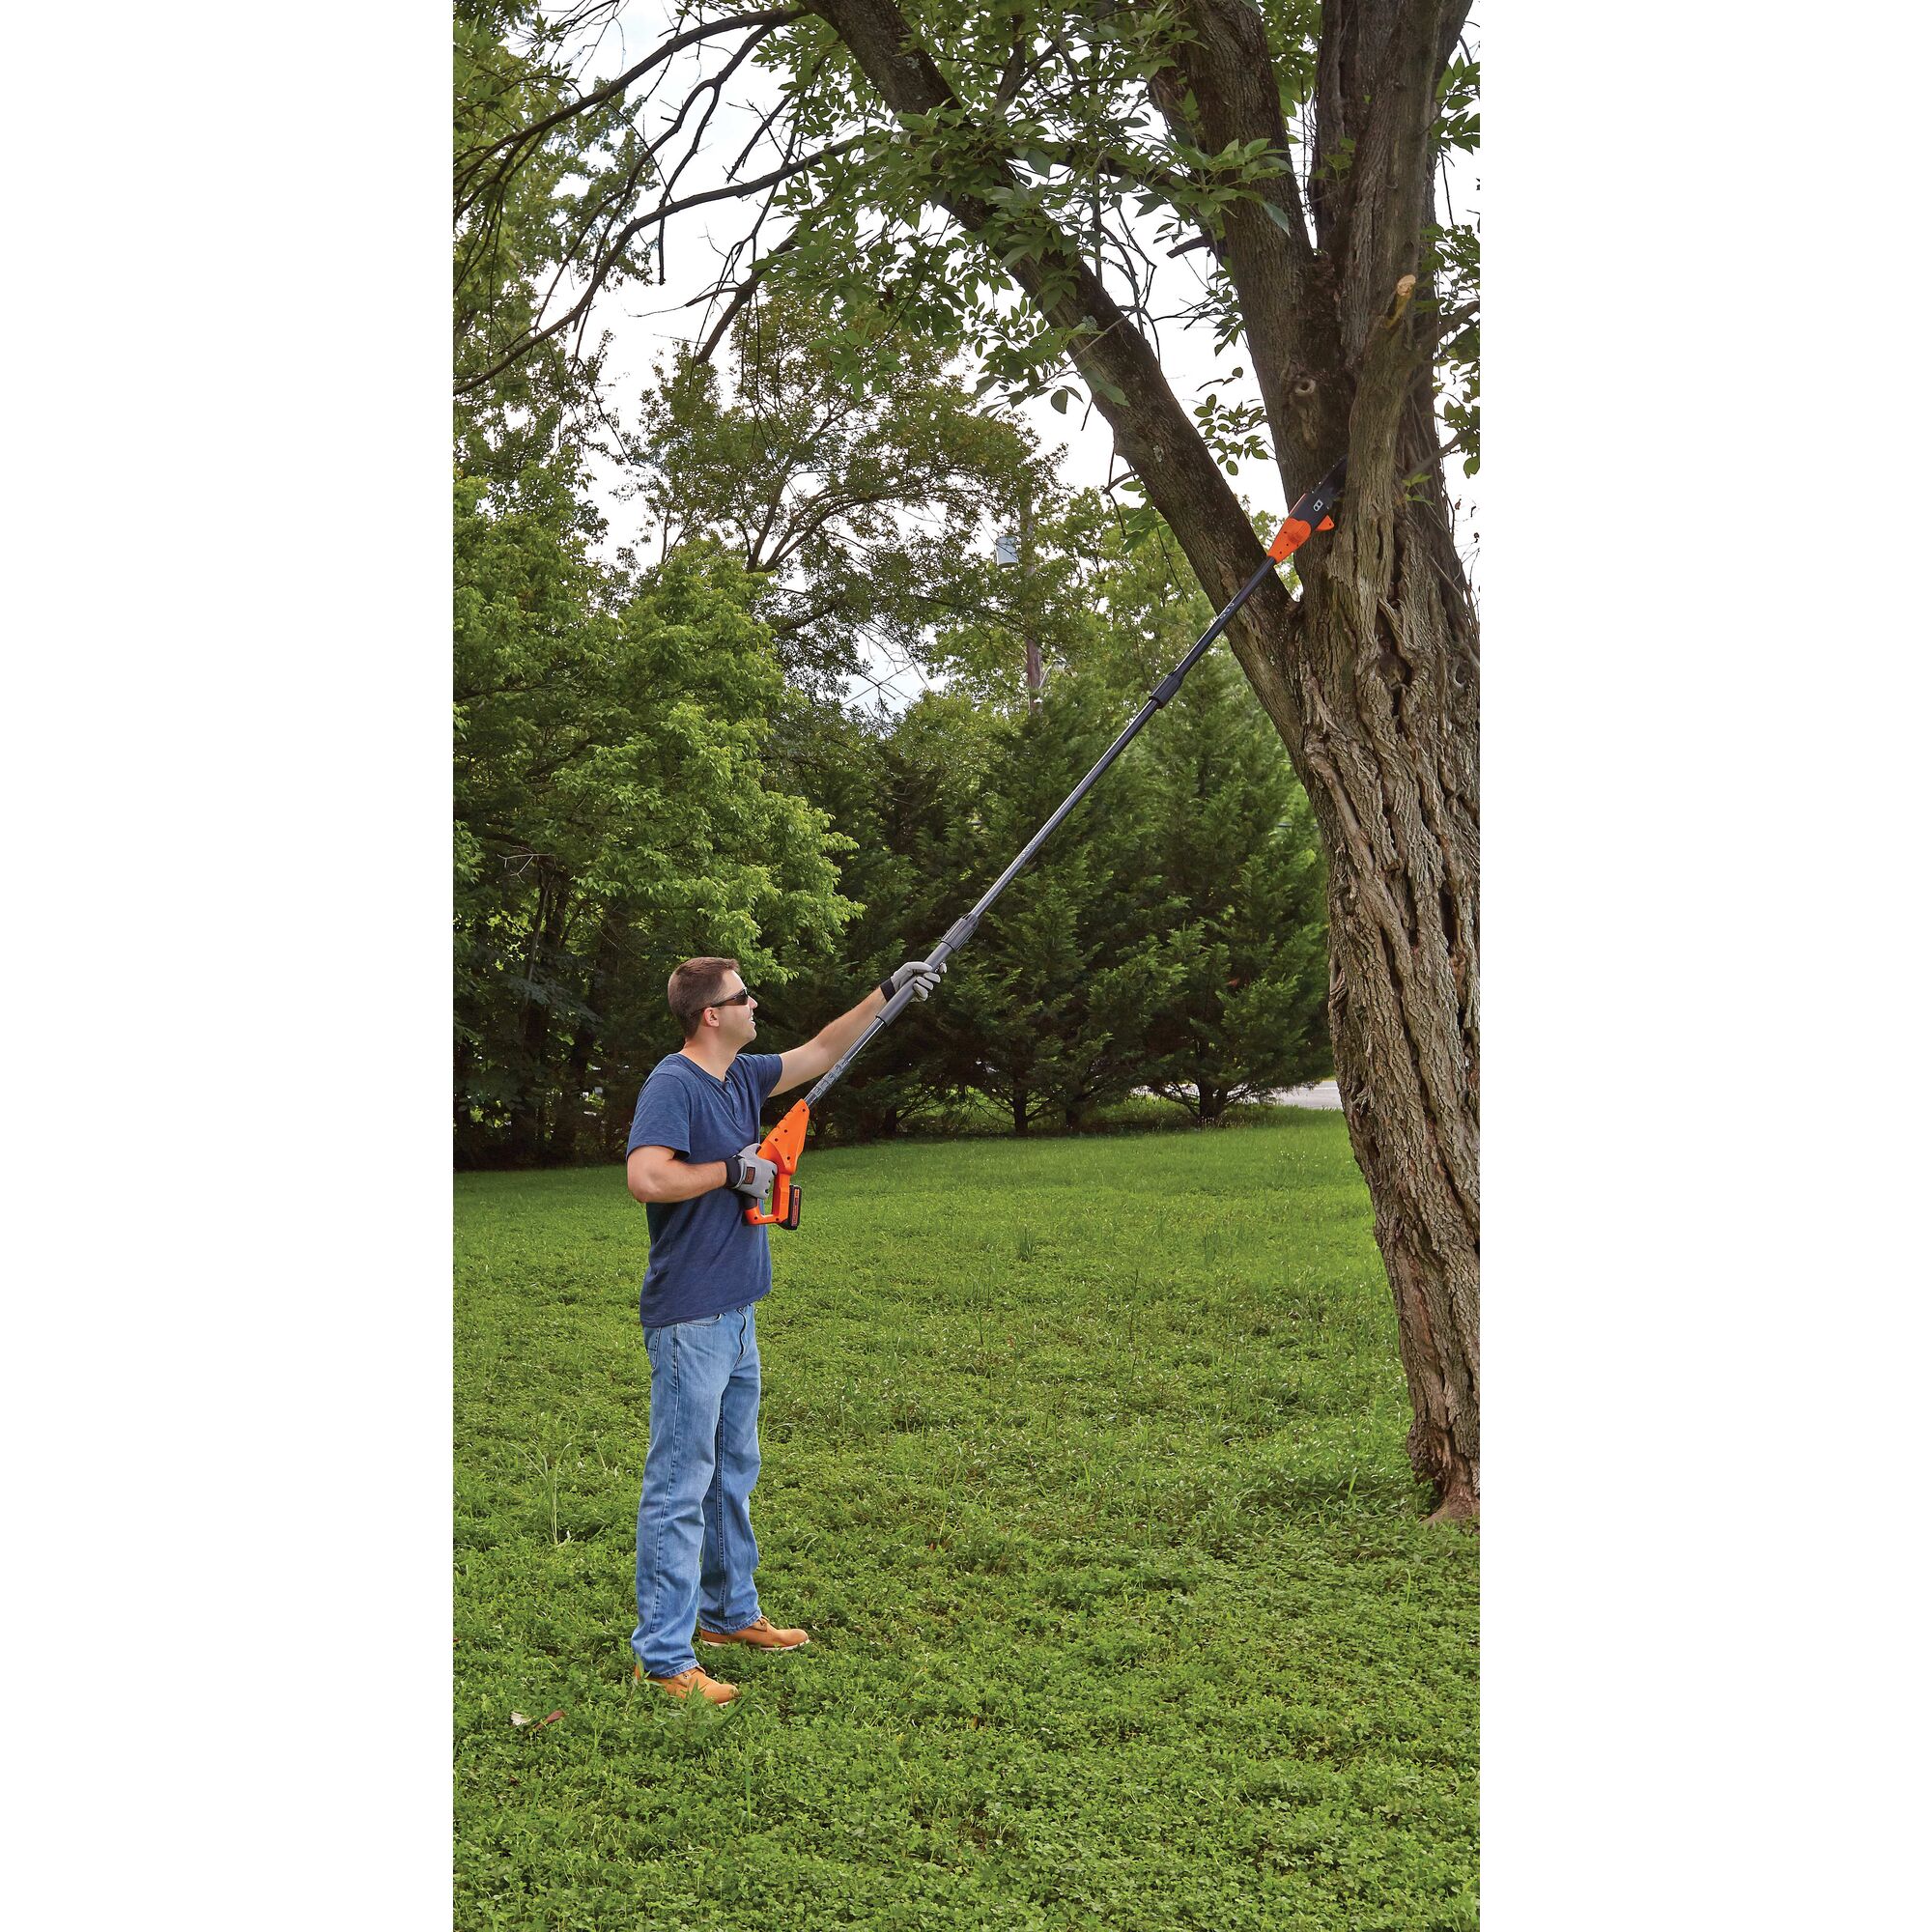 Lithium pole pruning saw being used by a person to cut high branch of tree.